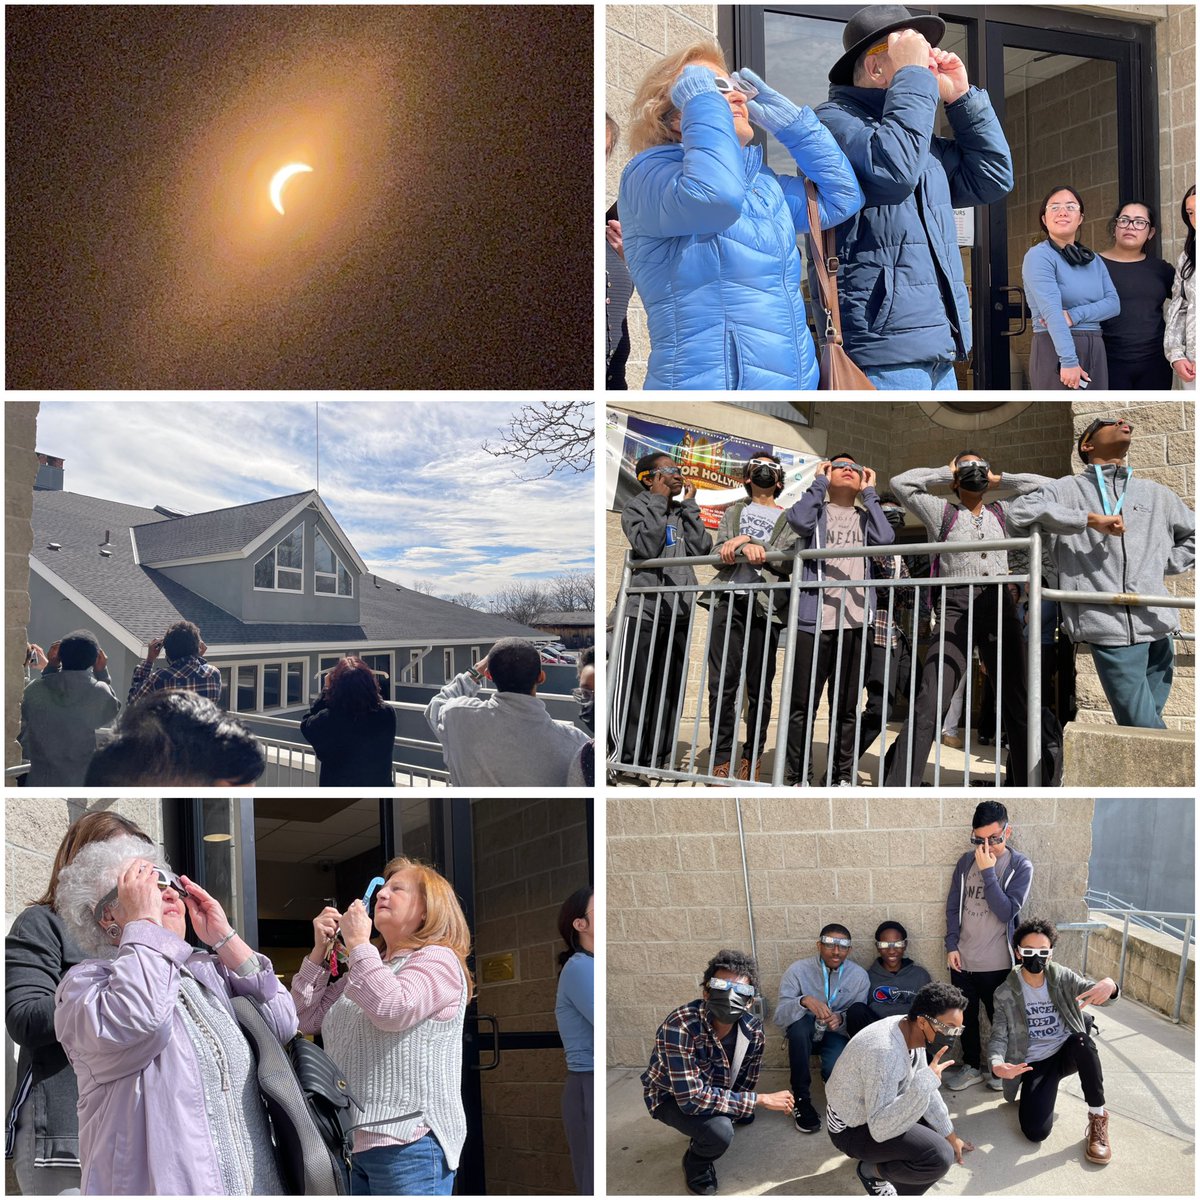 Eclipse 2024! Thanks to everyone who spent it with us at the Library!

#Eclipse2024 #solareclipse #StratfordLibrary #StratfordCT